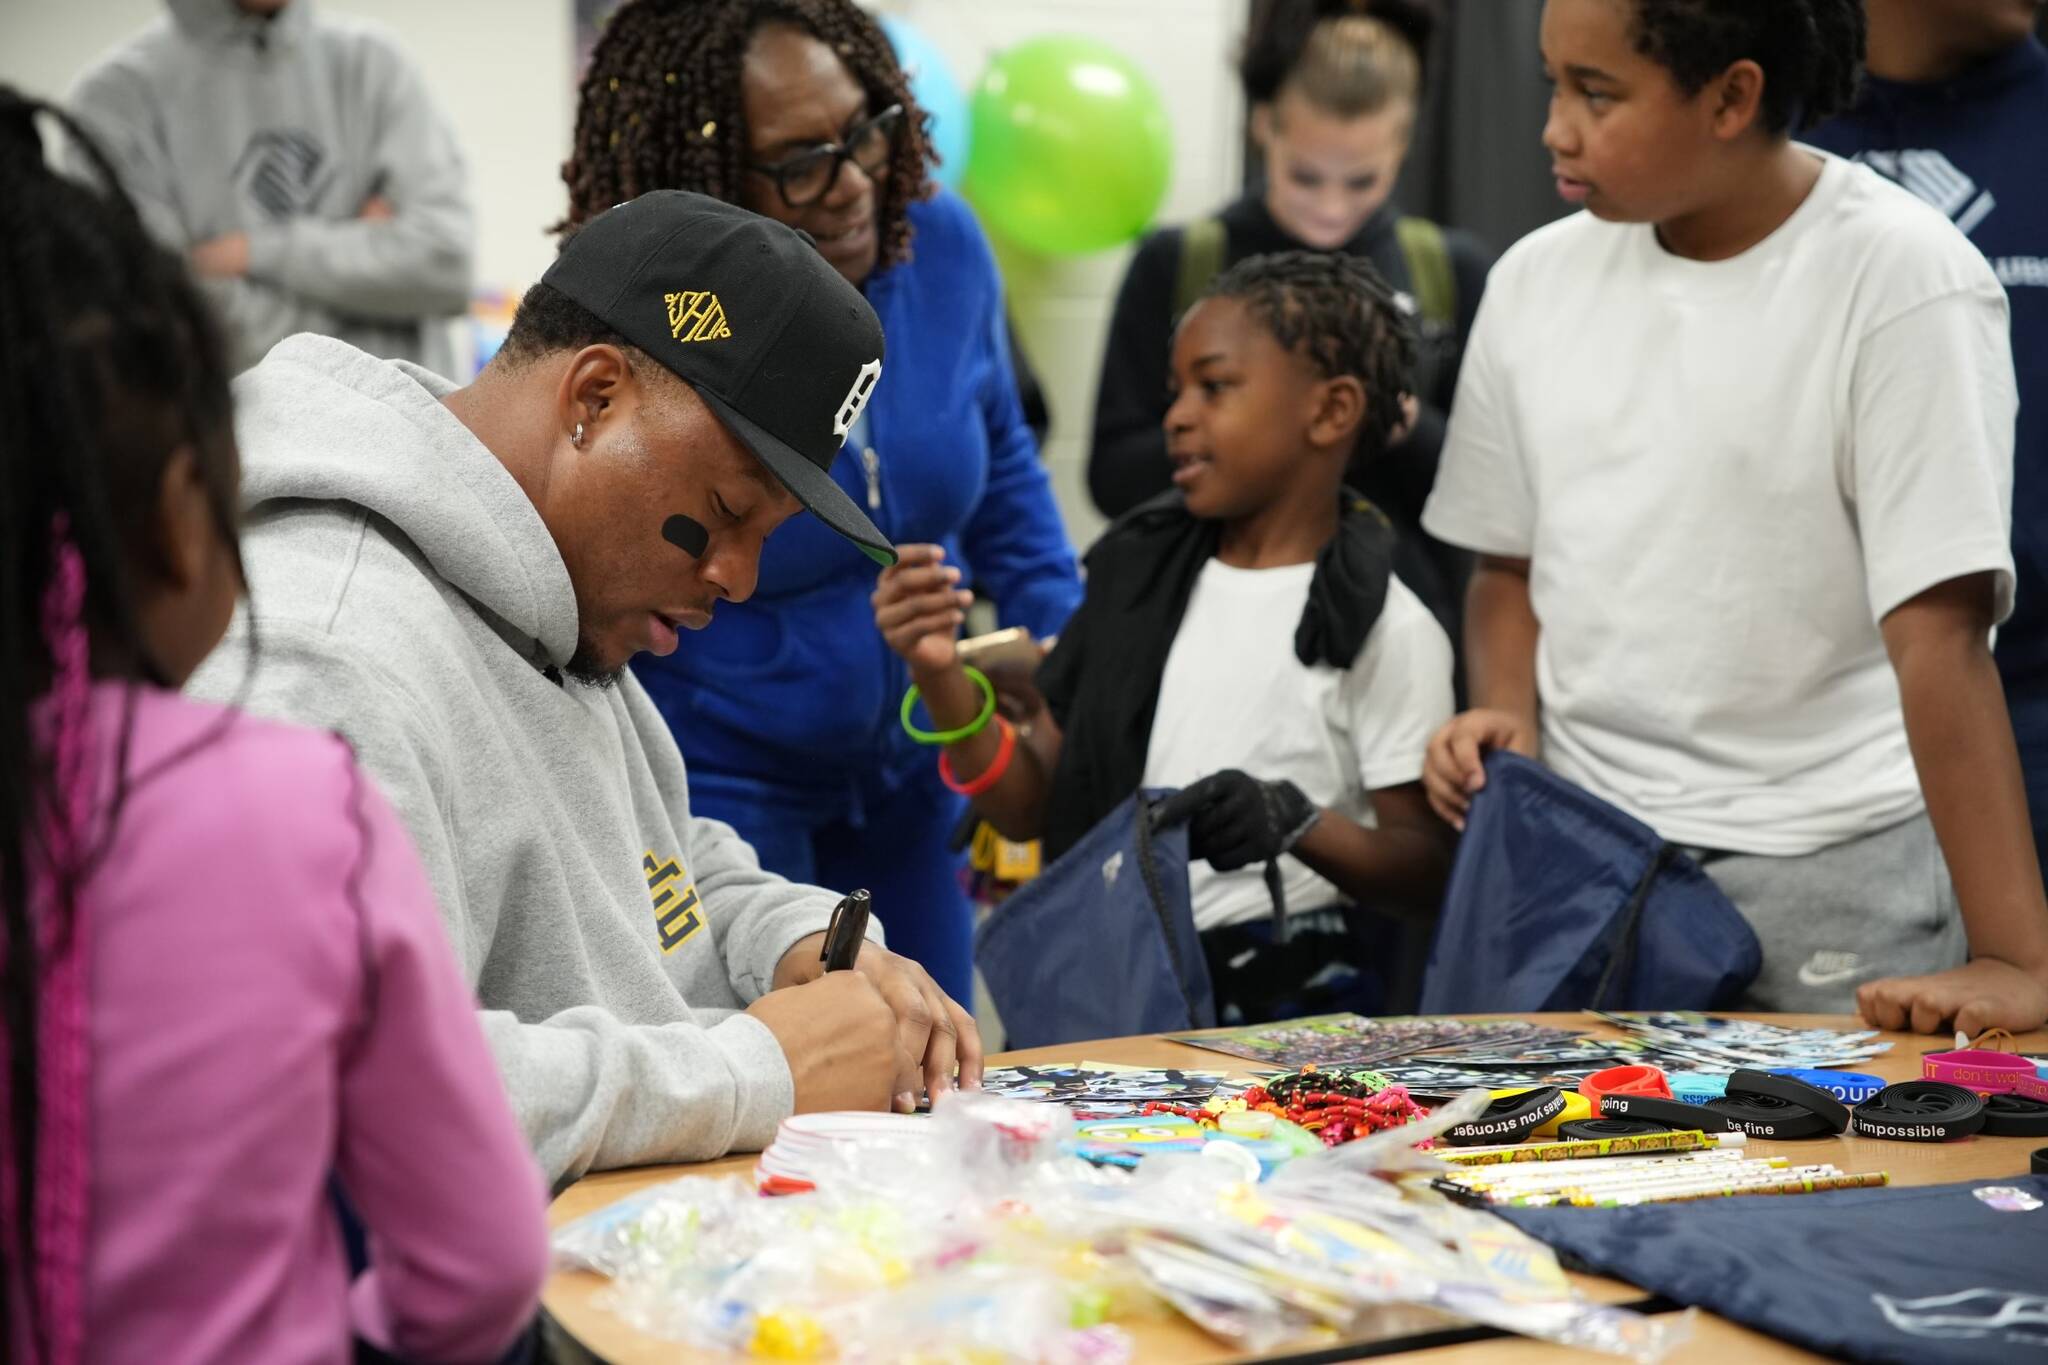 Uchenna Nwosu signs goodie bags for kids at the Federal Way Boys and Girls Club on Dec. 5. Photo courtesy of the Seattle Seahawks